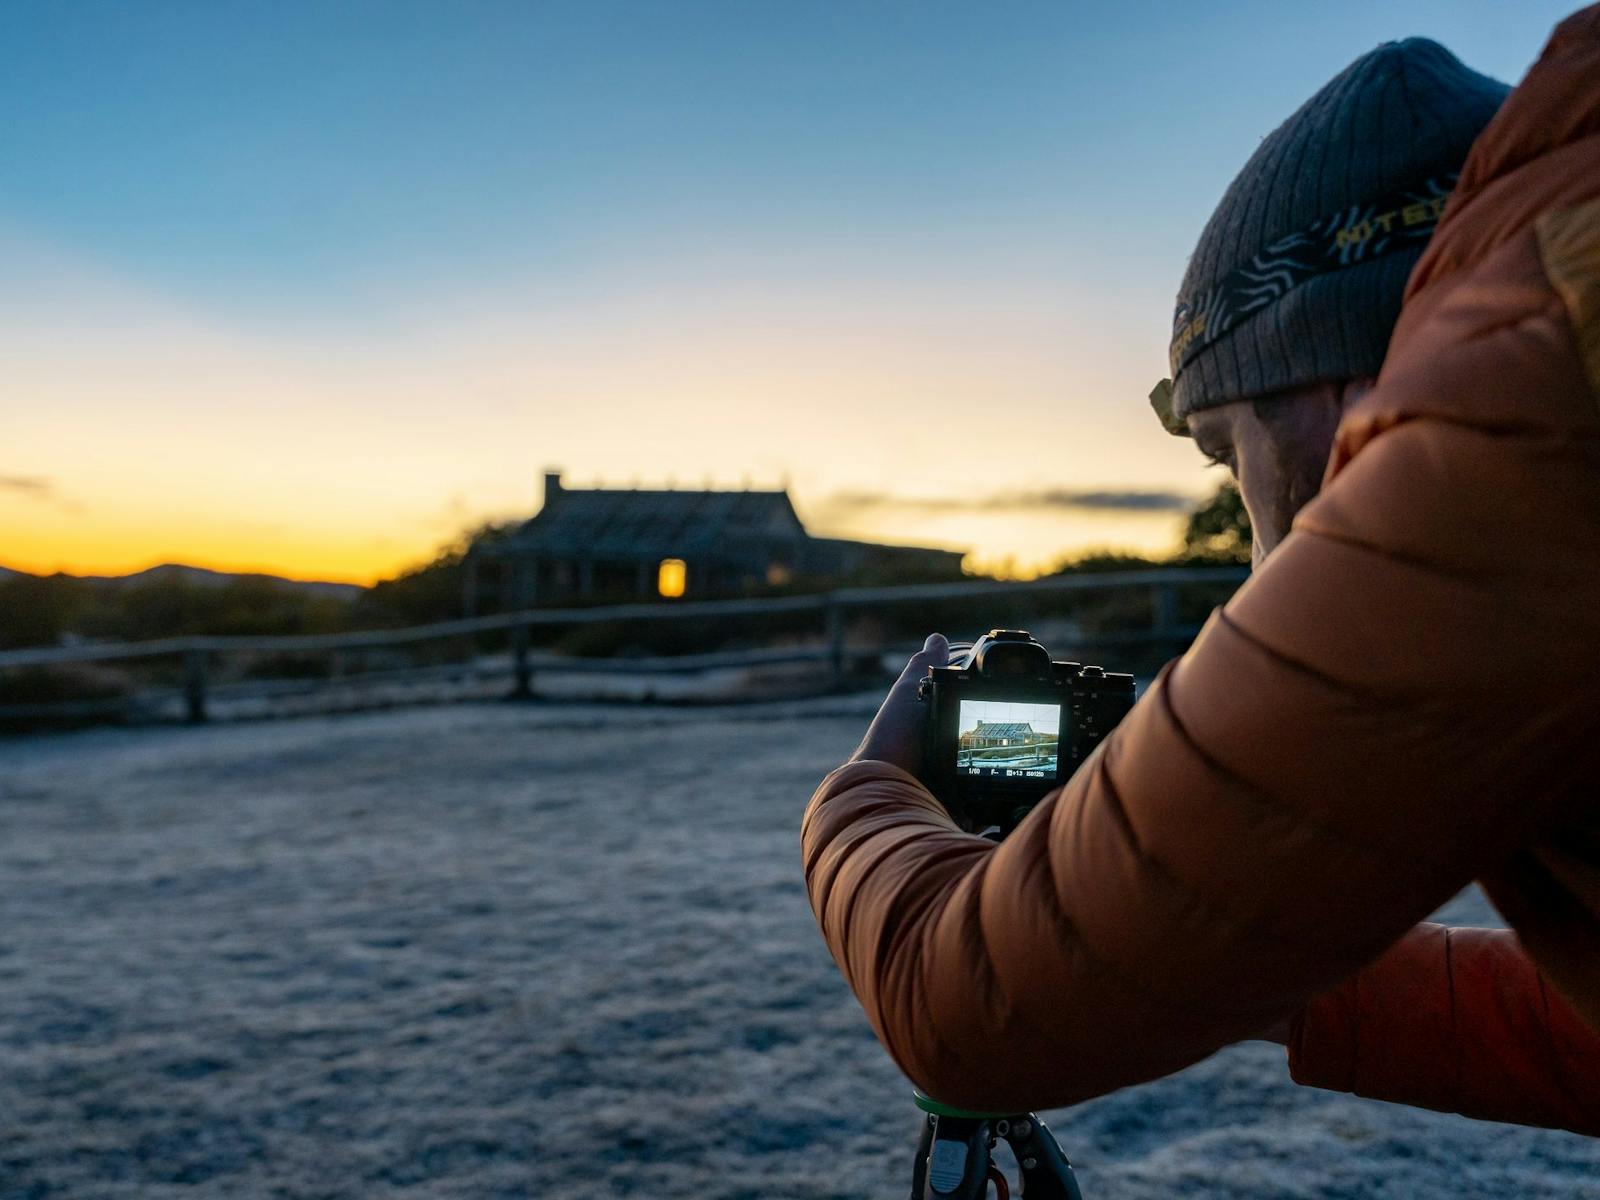 A photography workshop is taking place on a frosty morning at Craig's Hut.